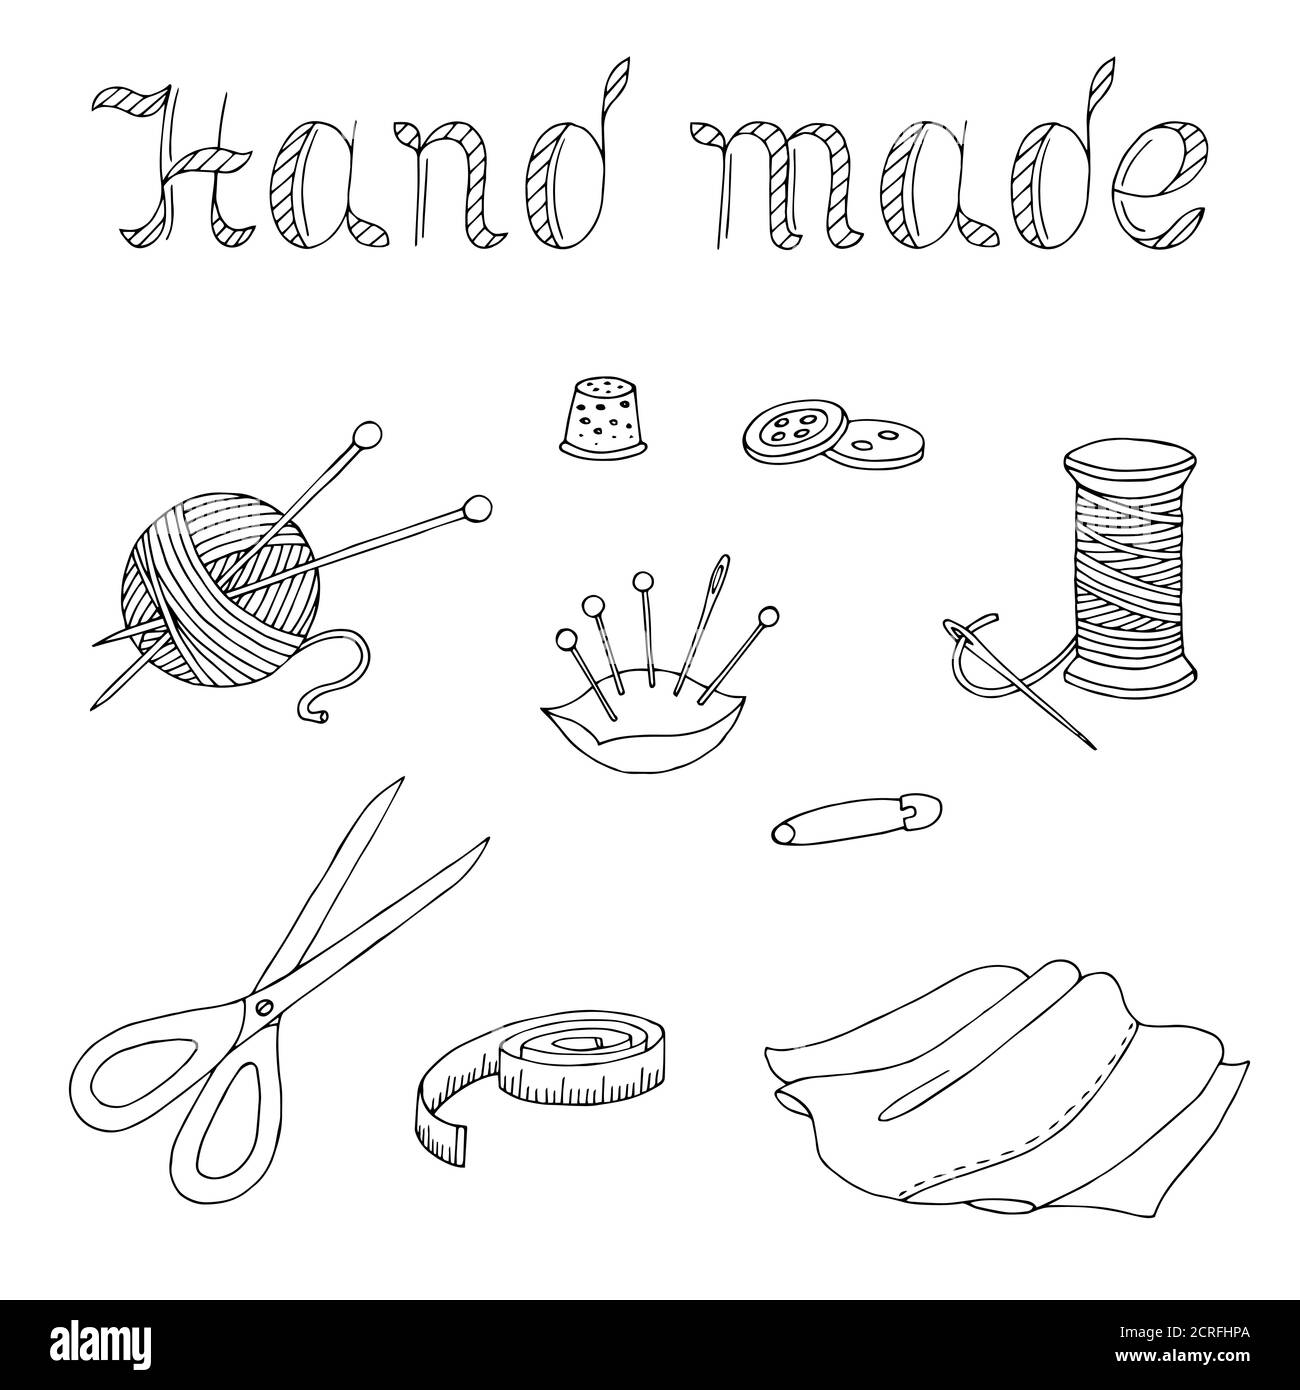 Hand made sewing graphic art color isolated set illustration vector Stock Vector